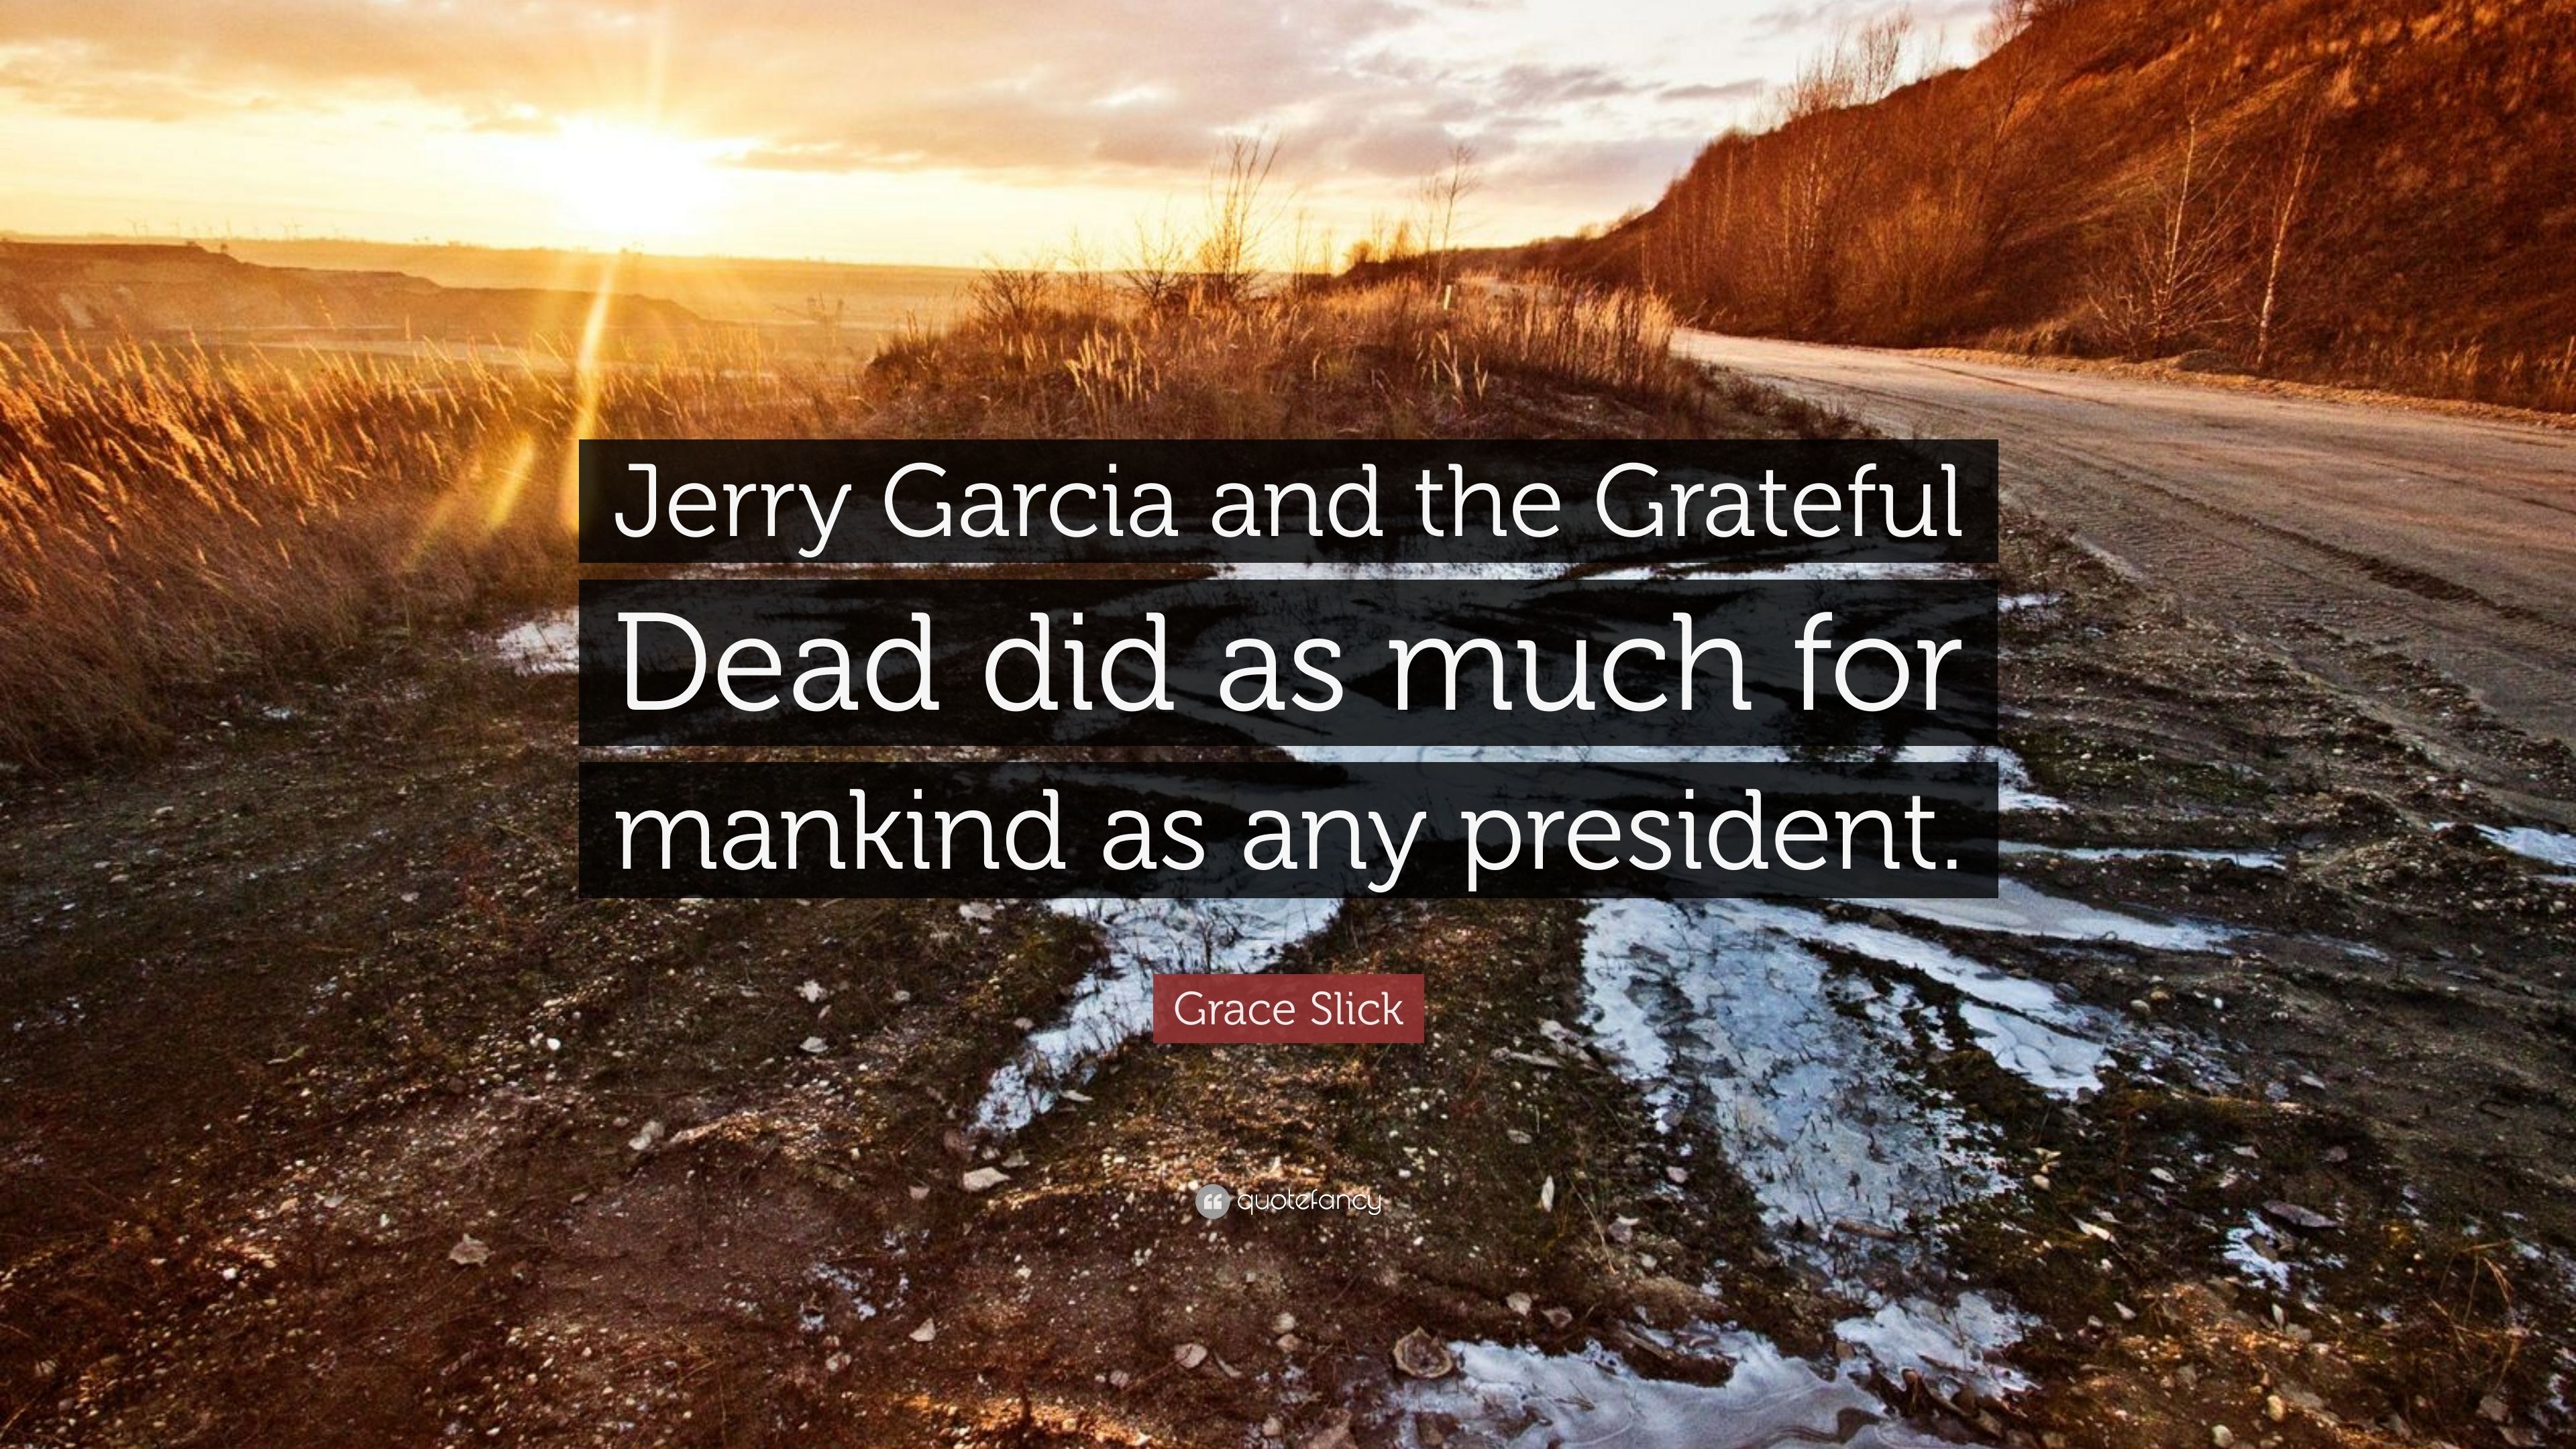 Grace Slick Quote: “Jerry Garcia and the Grateful Dead did as much